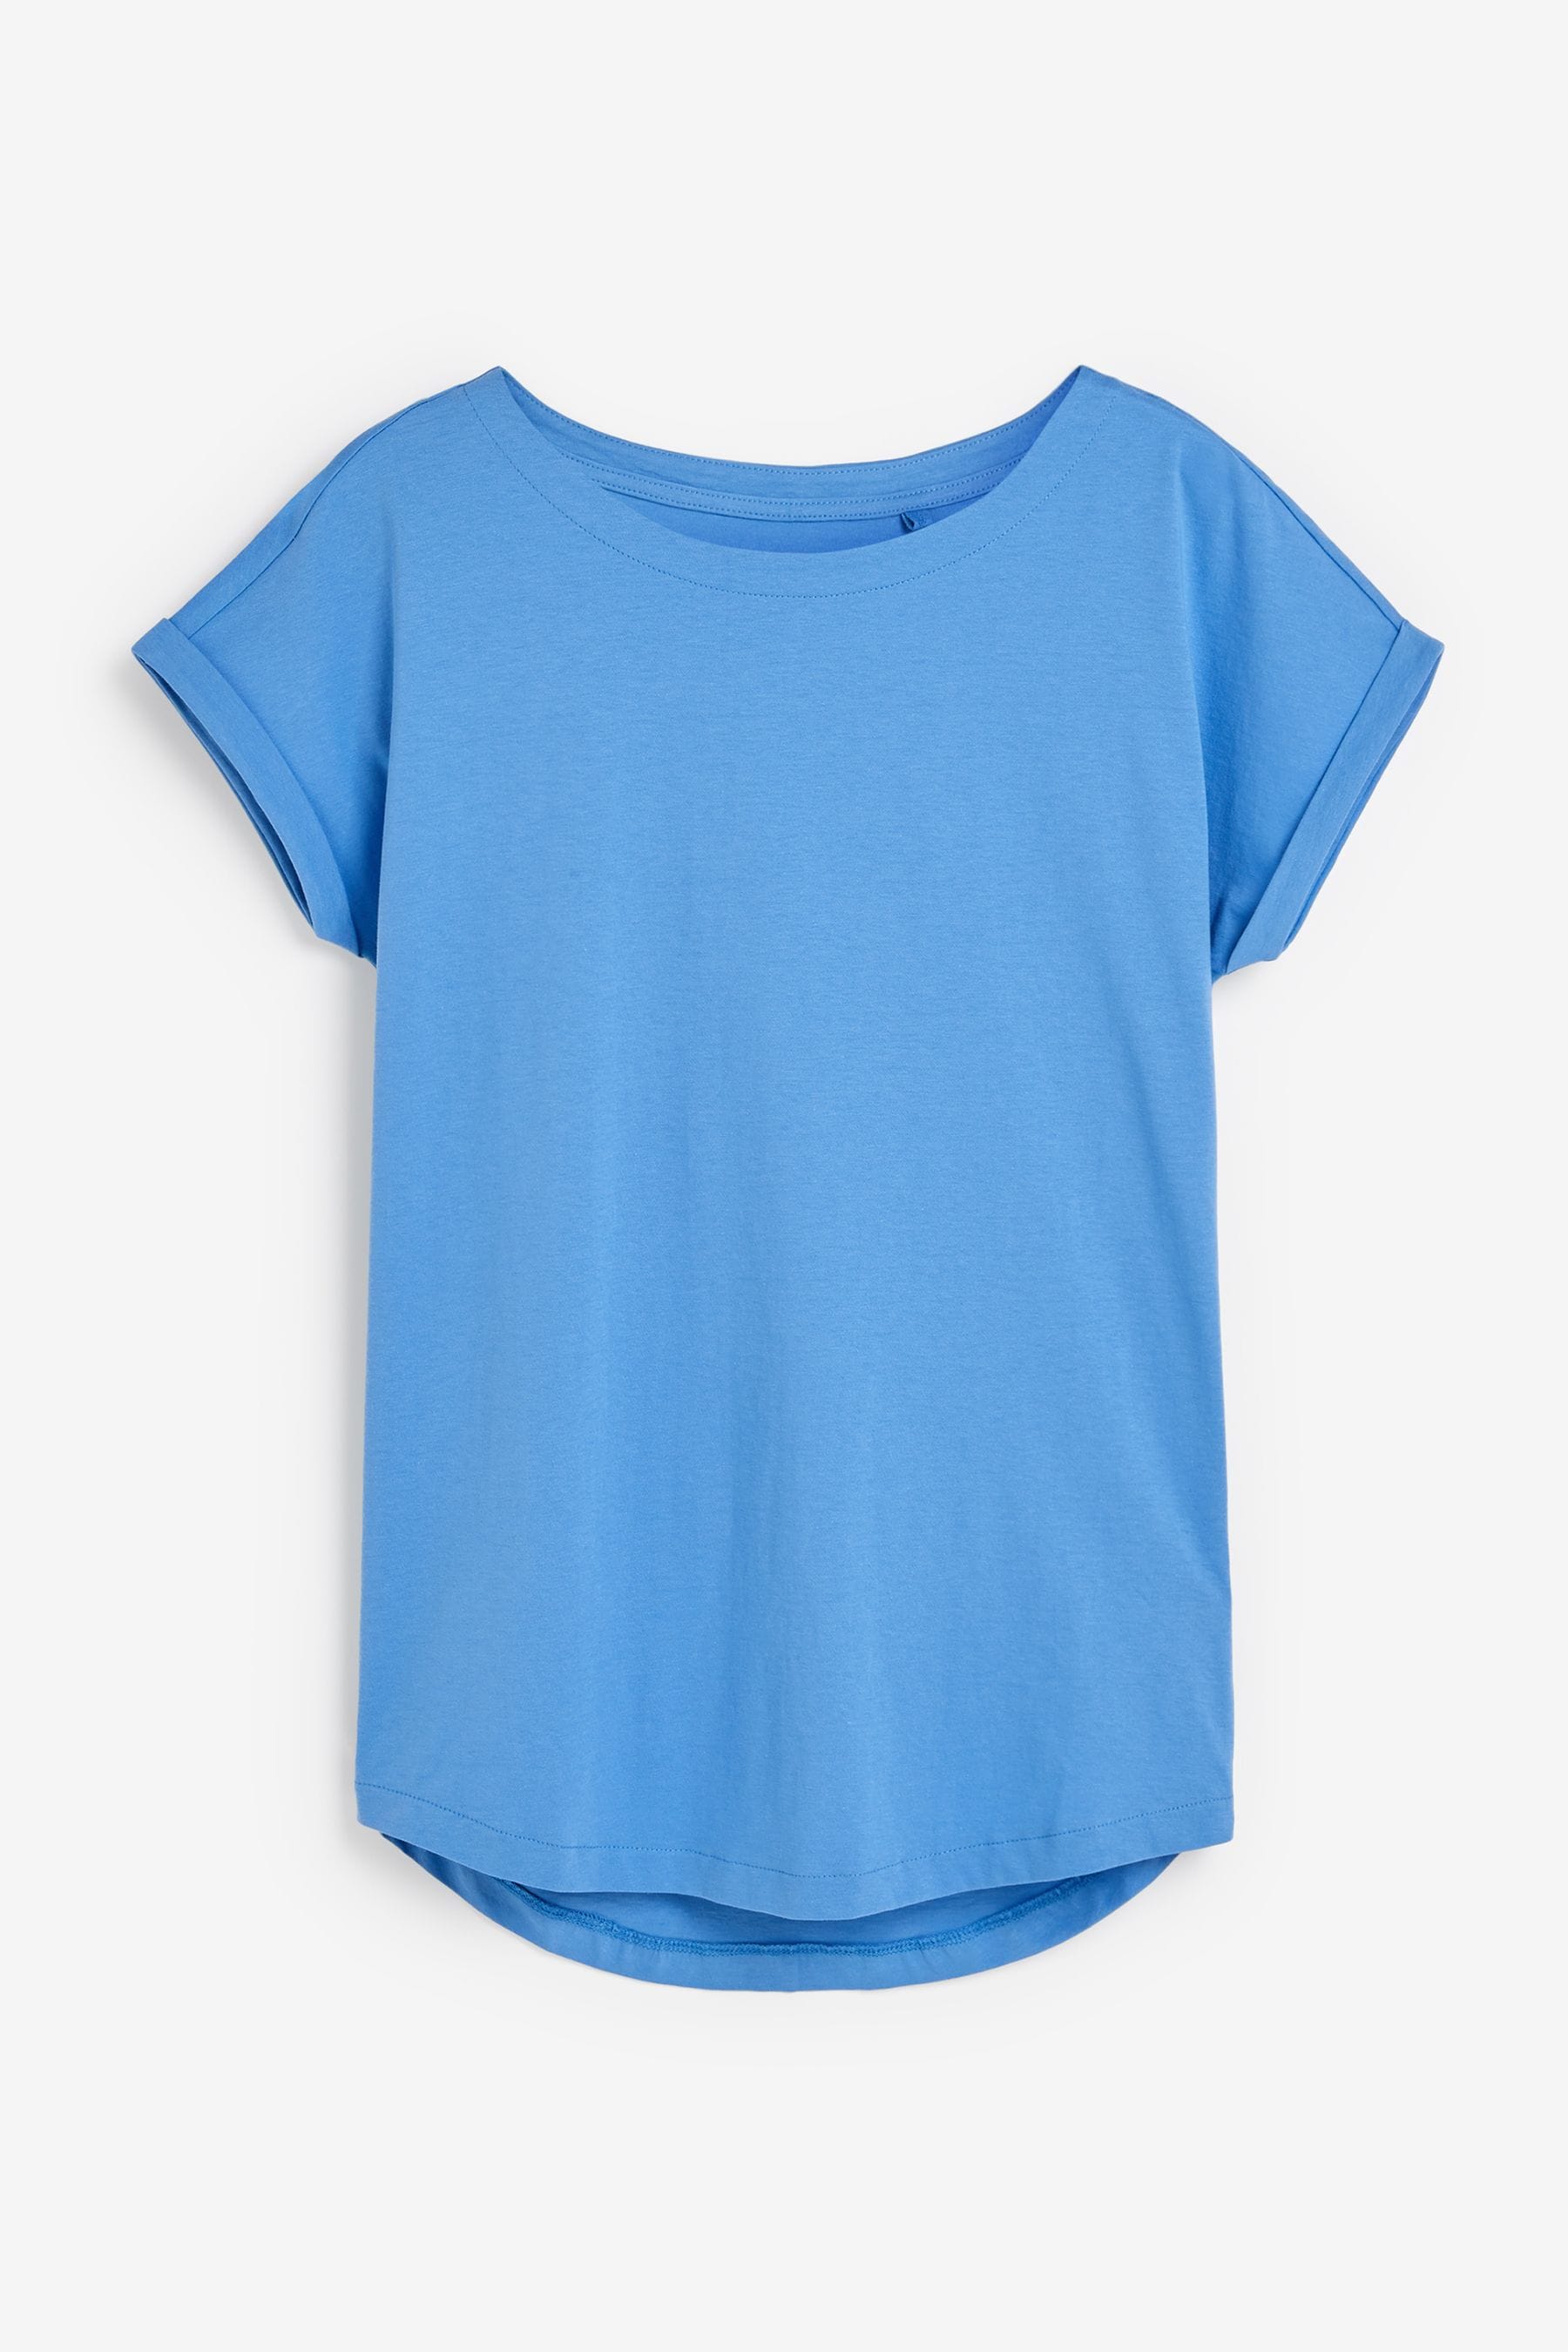 Buy Blue Pale Round Neck Cap Sleeve T-Shirt from the Next UK online shop